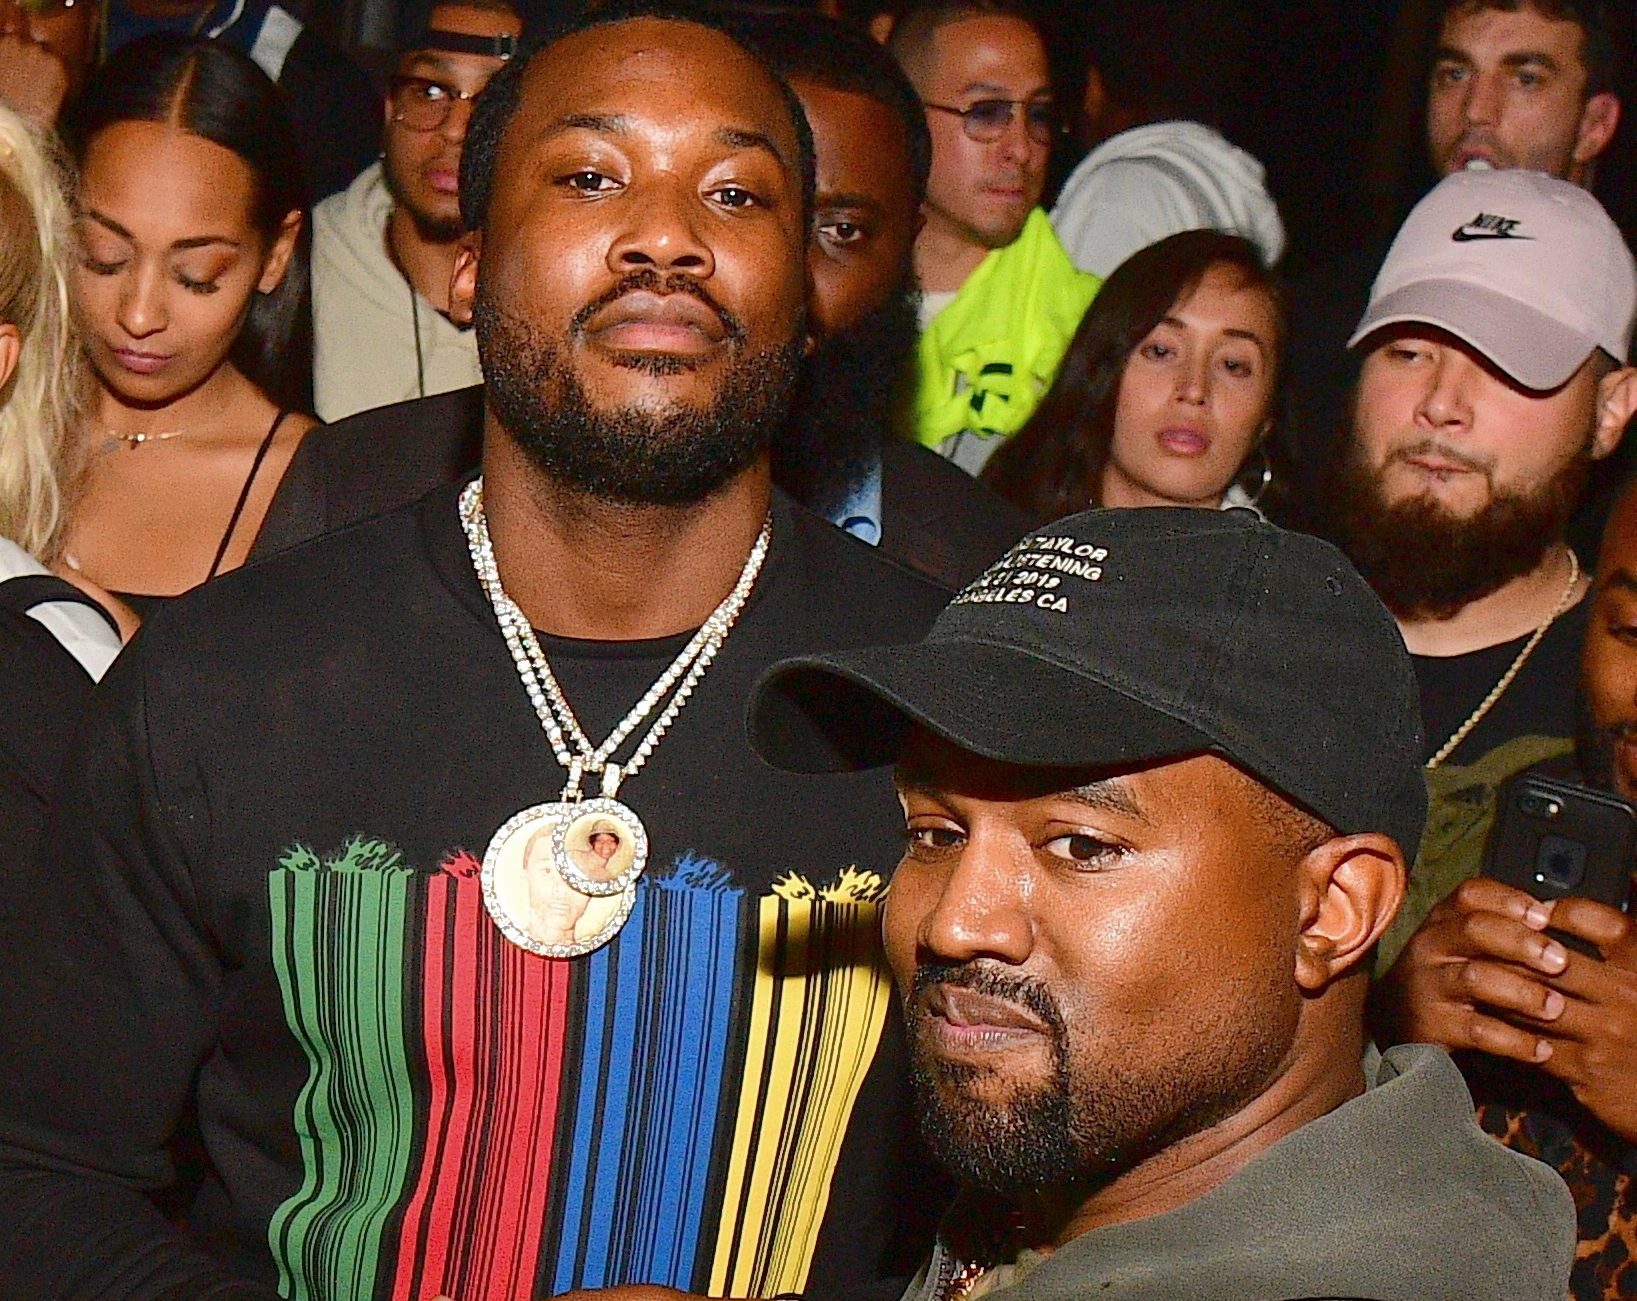 Meek Mill says he tried to talk Kanye West out of visiting White House